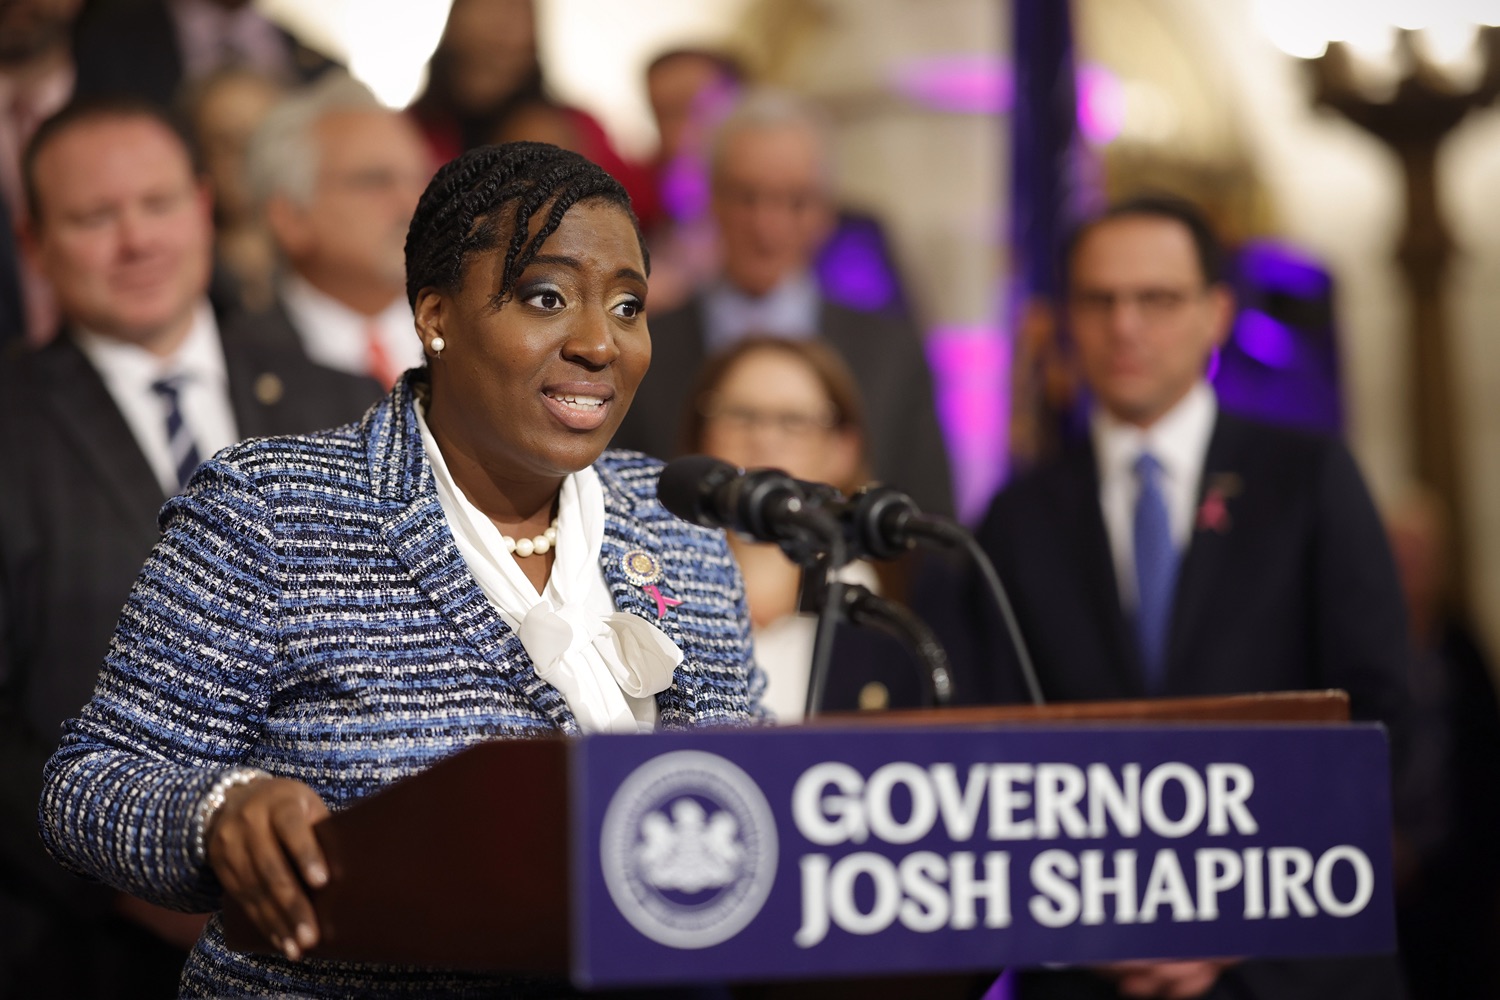 Governor Josh Shapiro signed the first bill of his Administration - Act 1 of 2023, a first-of-its-kind law in the nation that will require insurers to cover preventive breast and ovarian cancer screenings for high-risk women at no cost. MAY 01, 2023 - HARRISBURG, PA<br><a href="https://filesource.amperwave.net/commonwealthofpa/photo/23041_gov_sb8_dz_005.JPG" target="_blank">⇣ Download Photo</a>